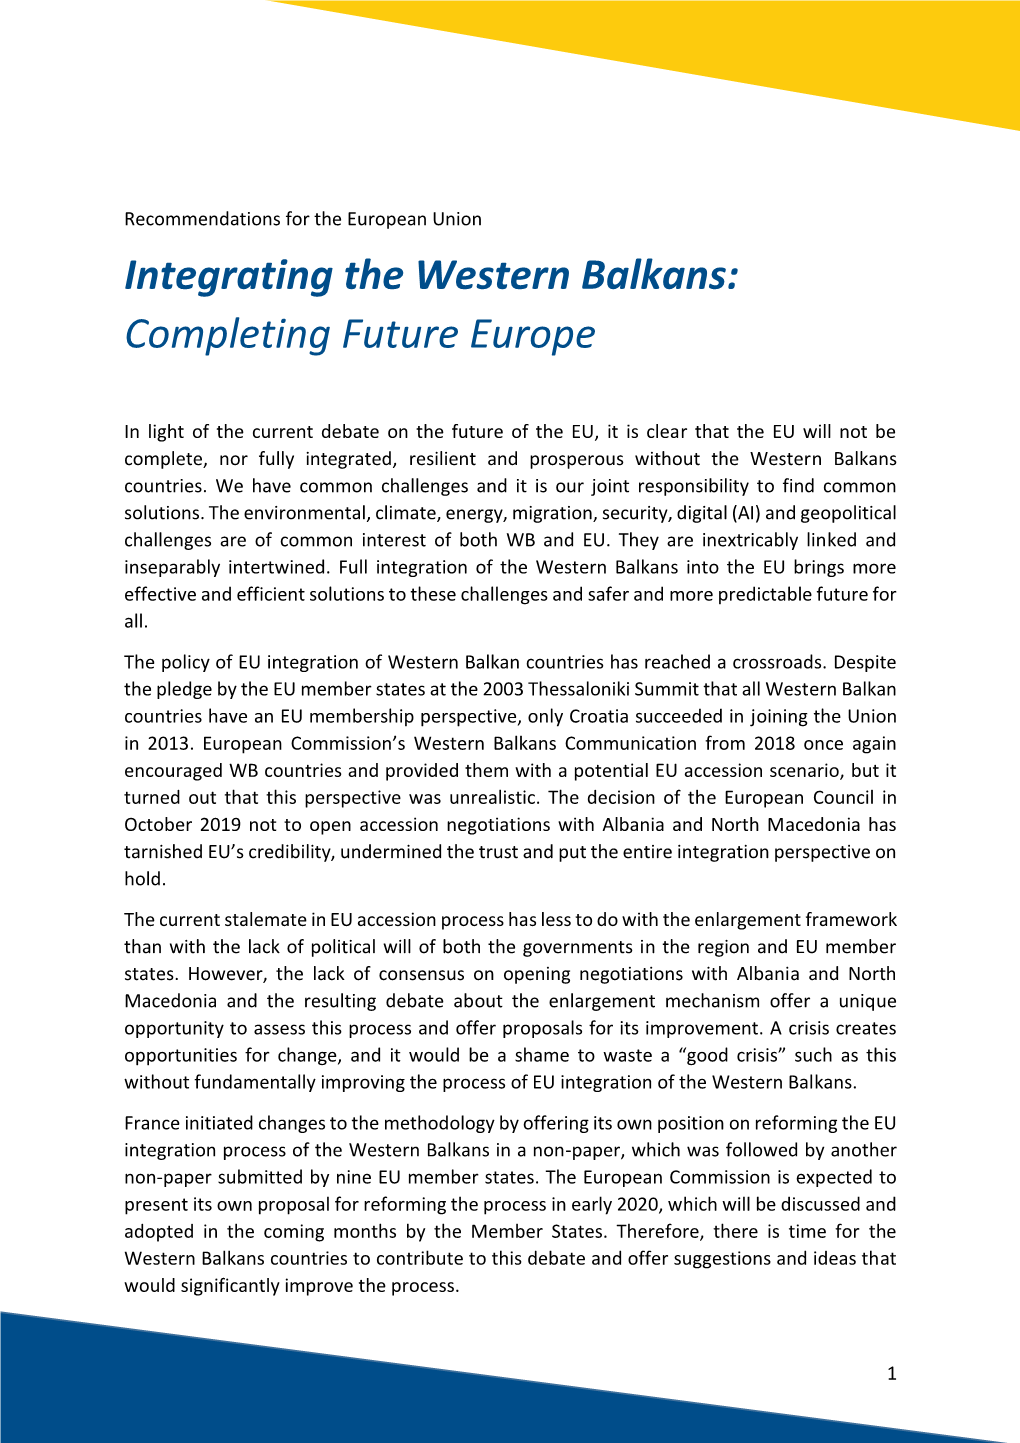 Integrating the Western Balkans: Completing Future Europe